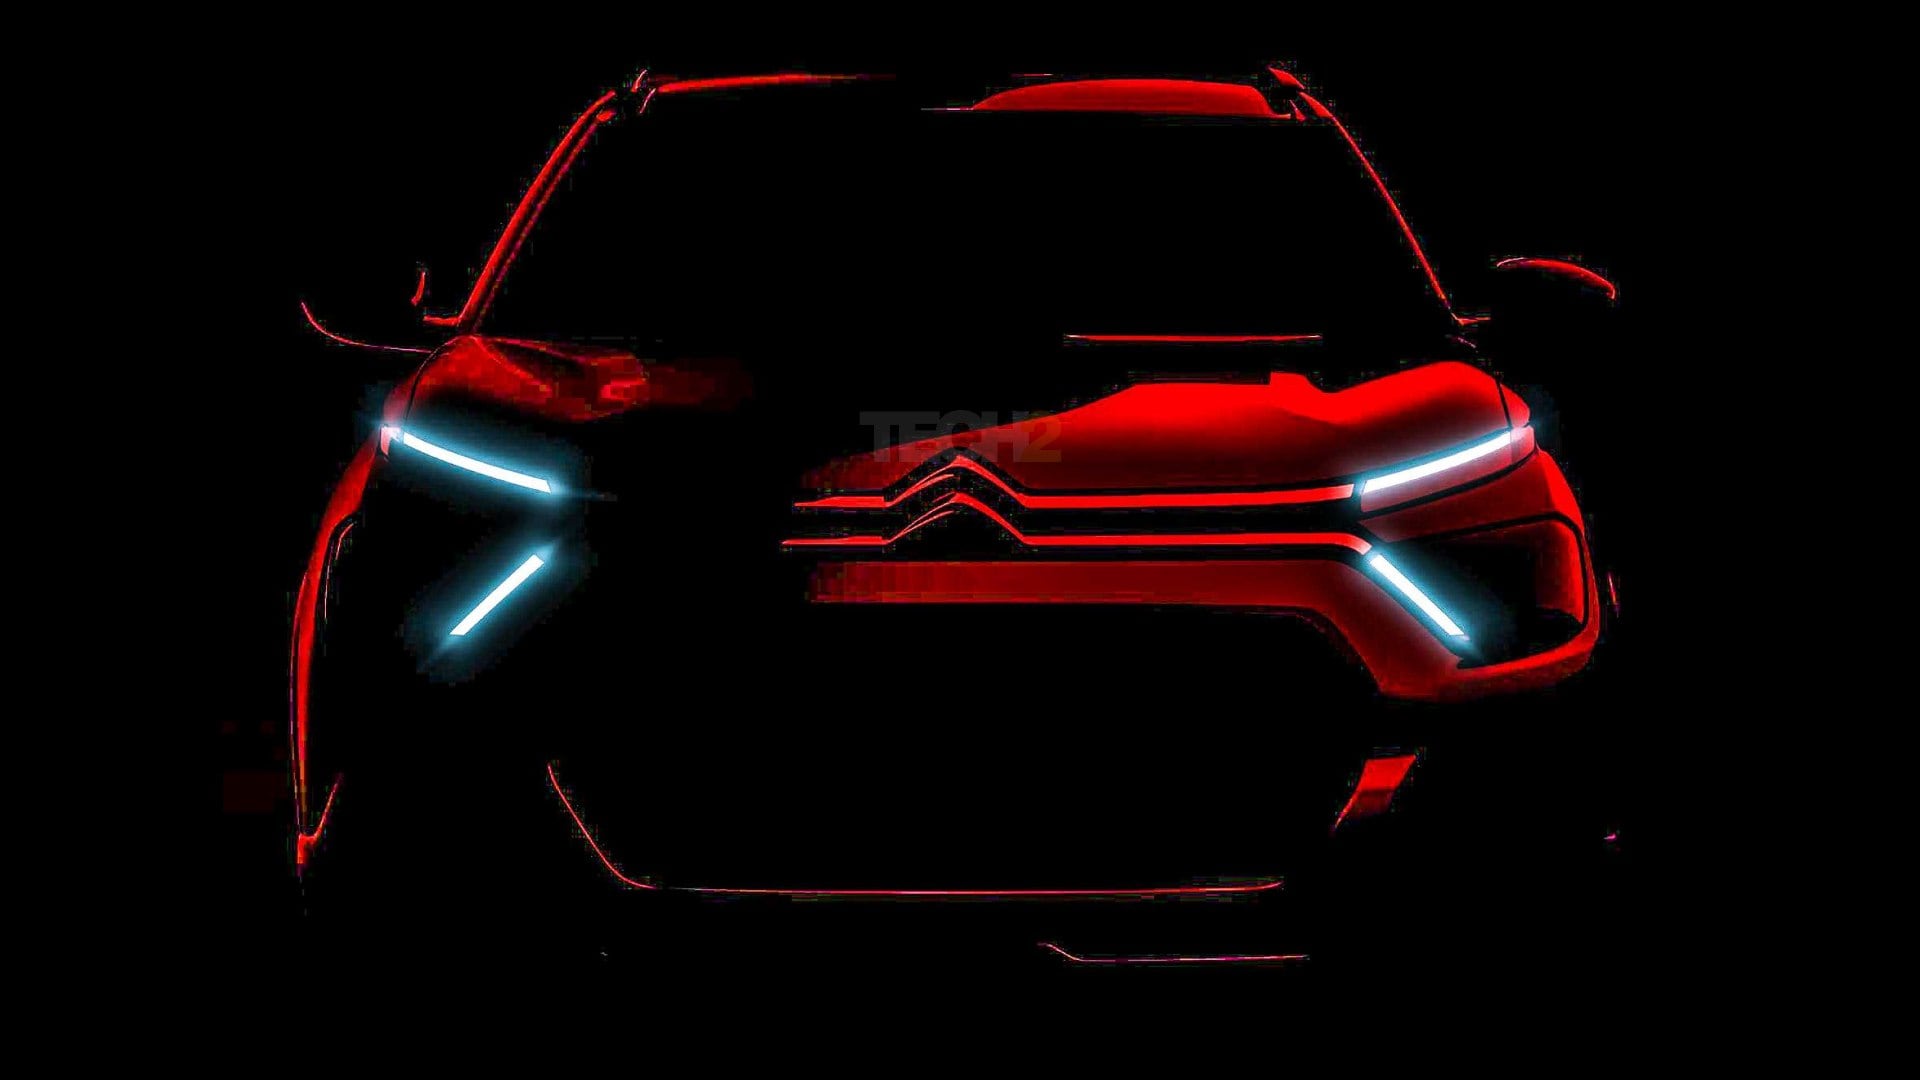 Made-In-India Citroen C3 Compact Suv Teased Ahead Of World Premiere On 16 September- Technology News, Firstpost